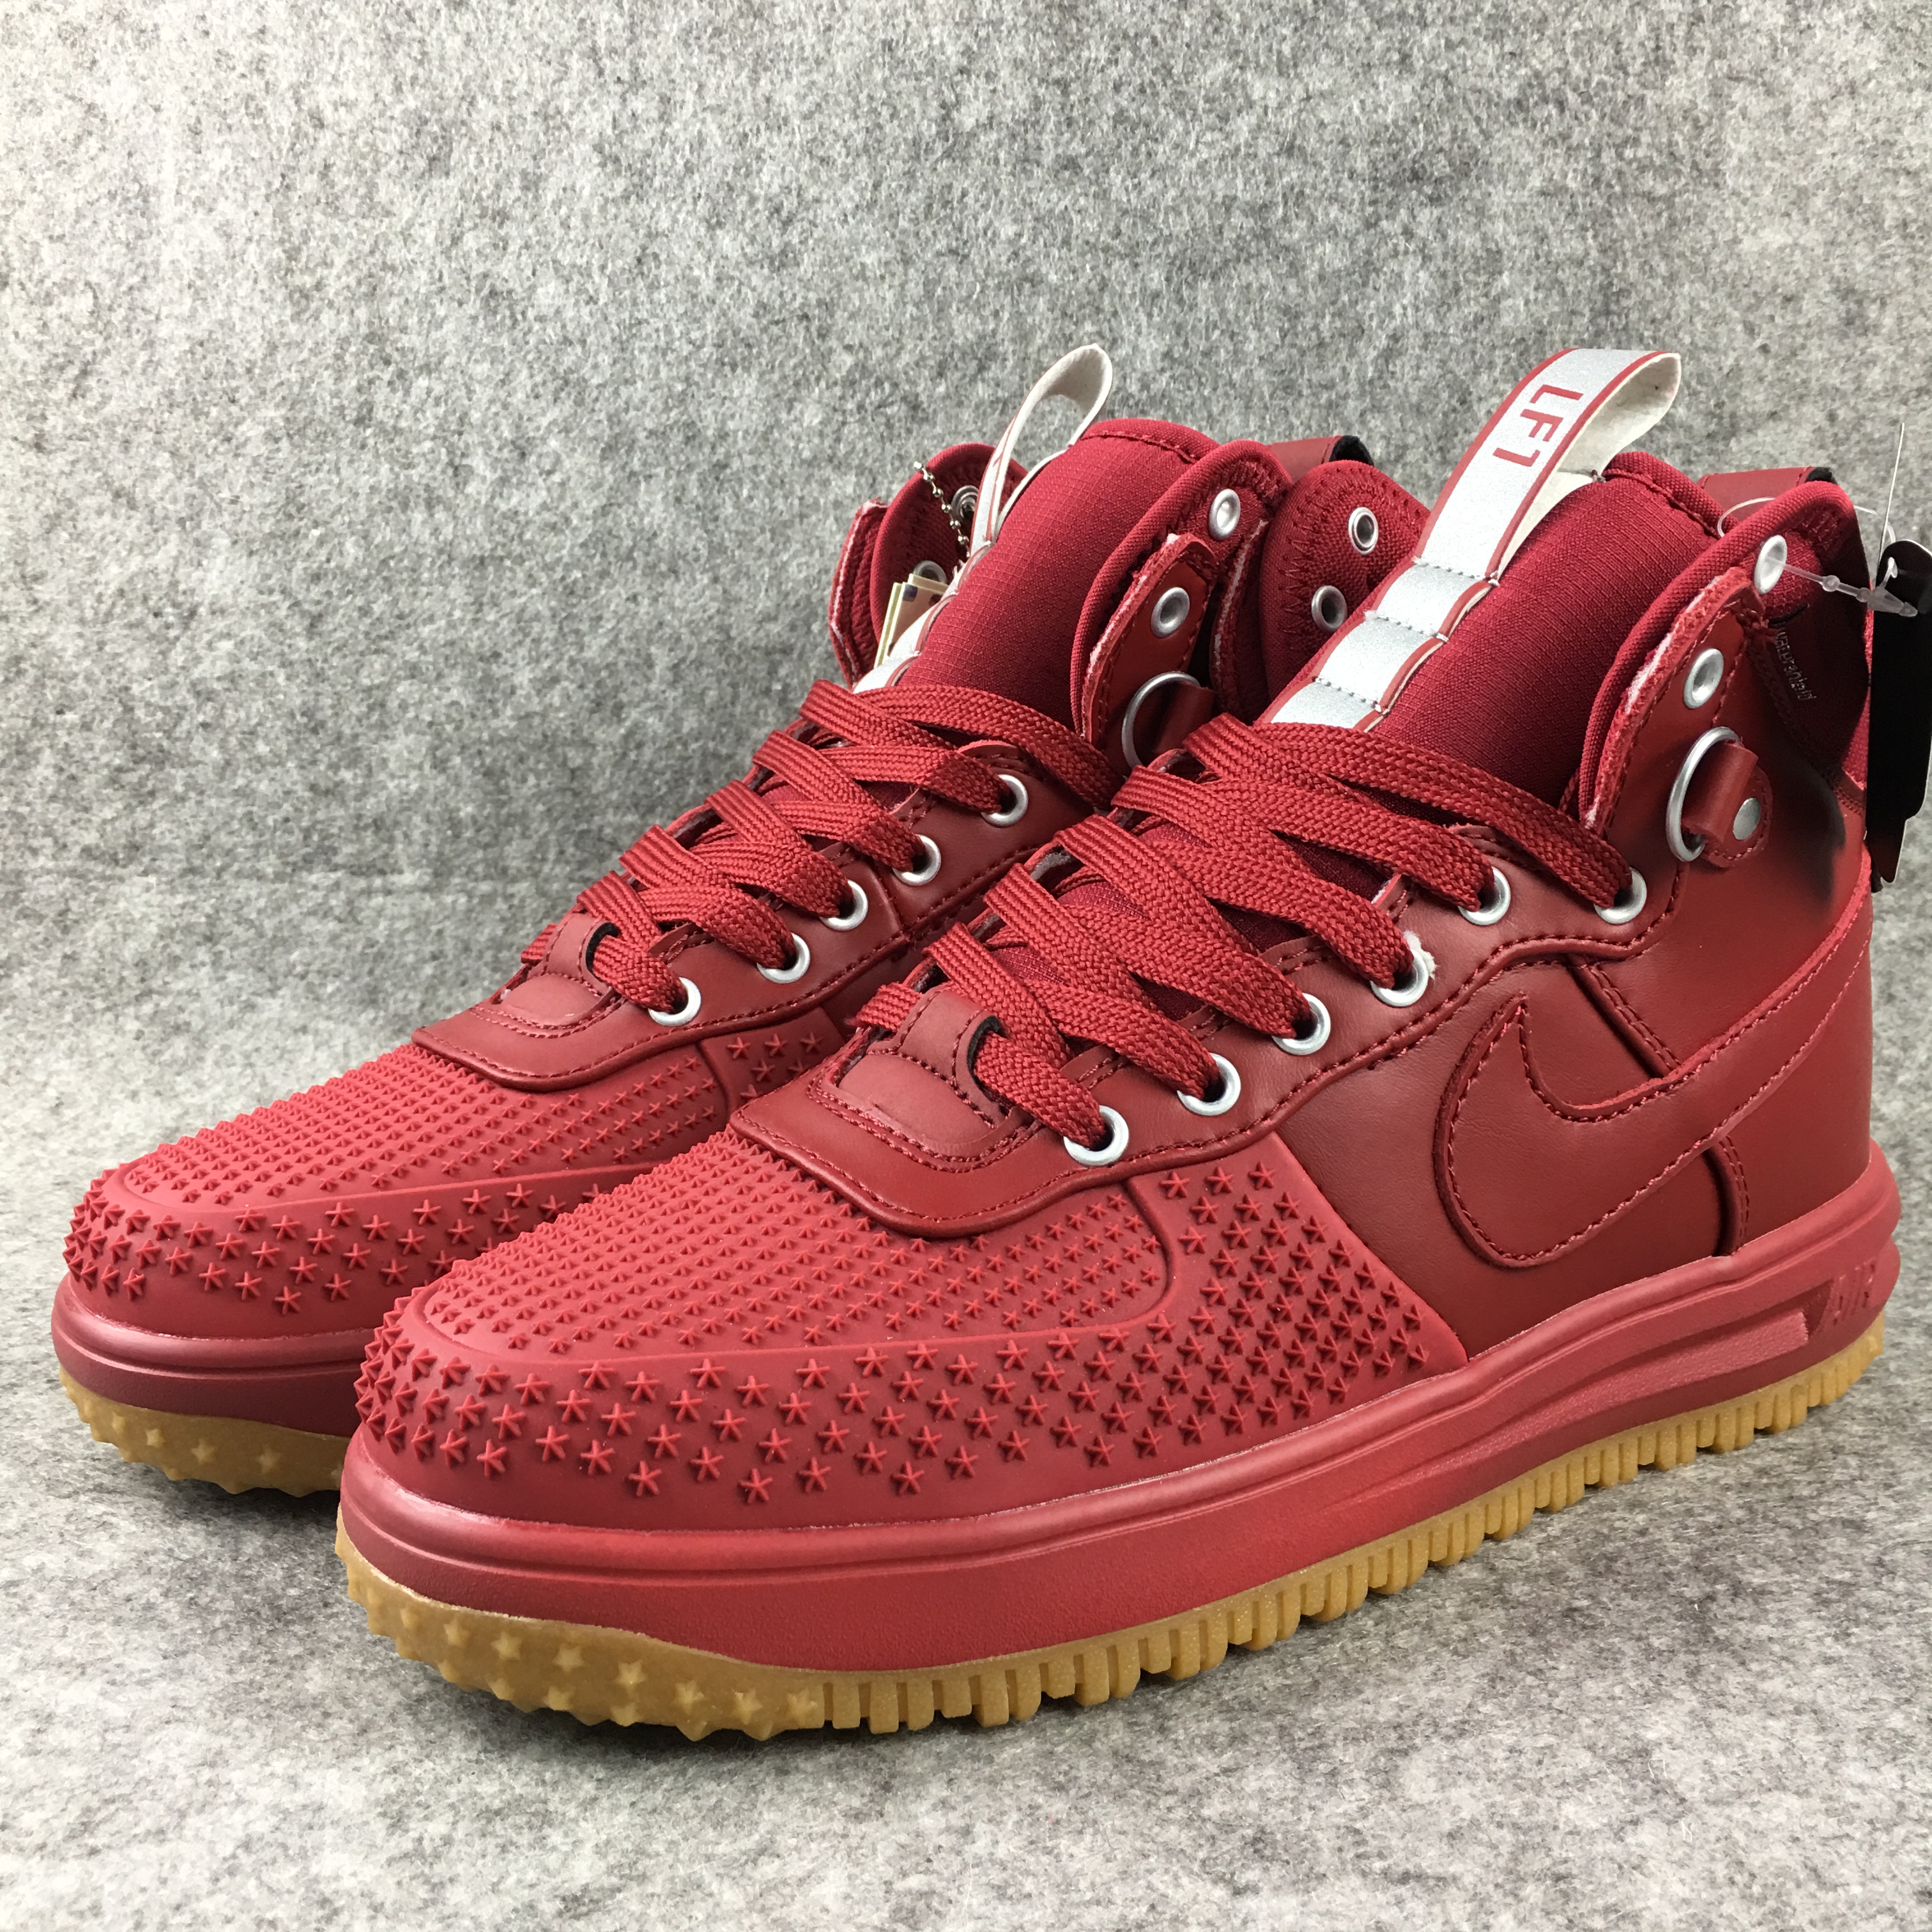 New Nike Lunar Force 1 High All Red Gum Sole